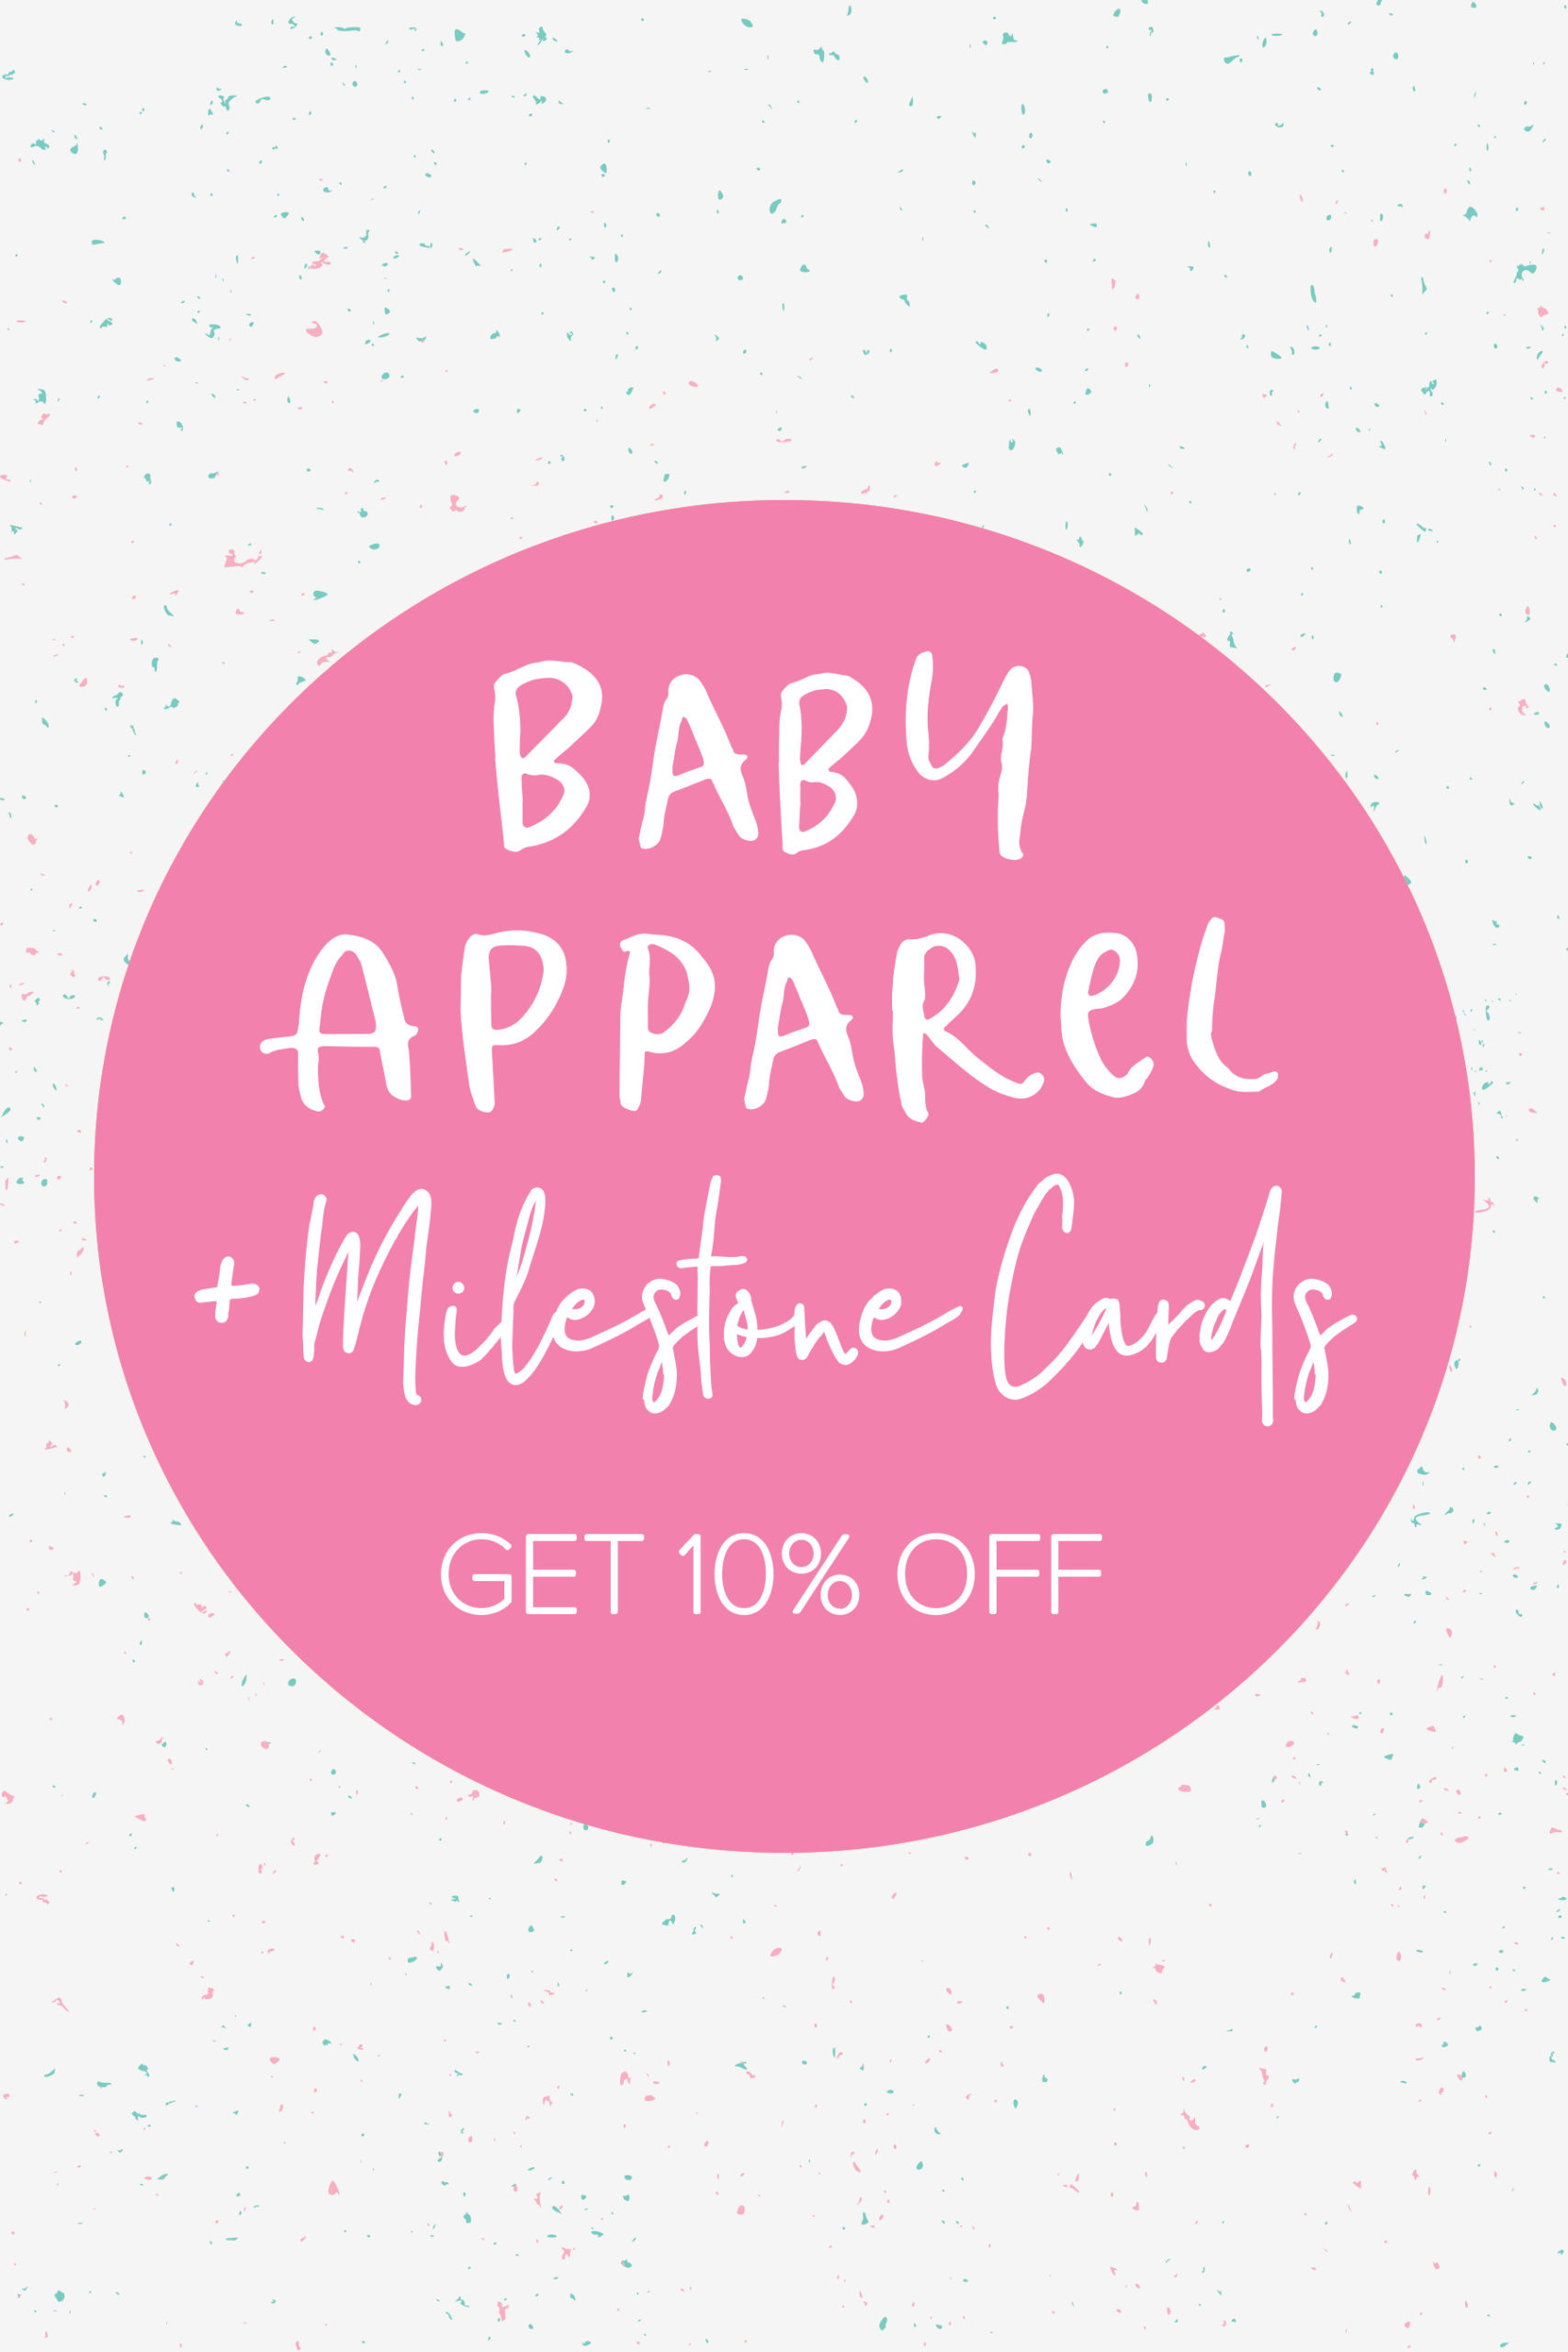 Baby Apparel Milestone Cards Offer